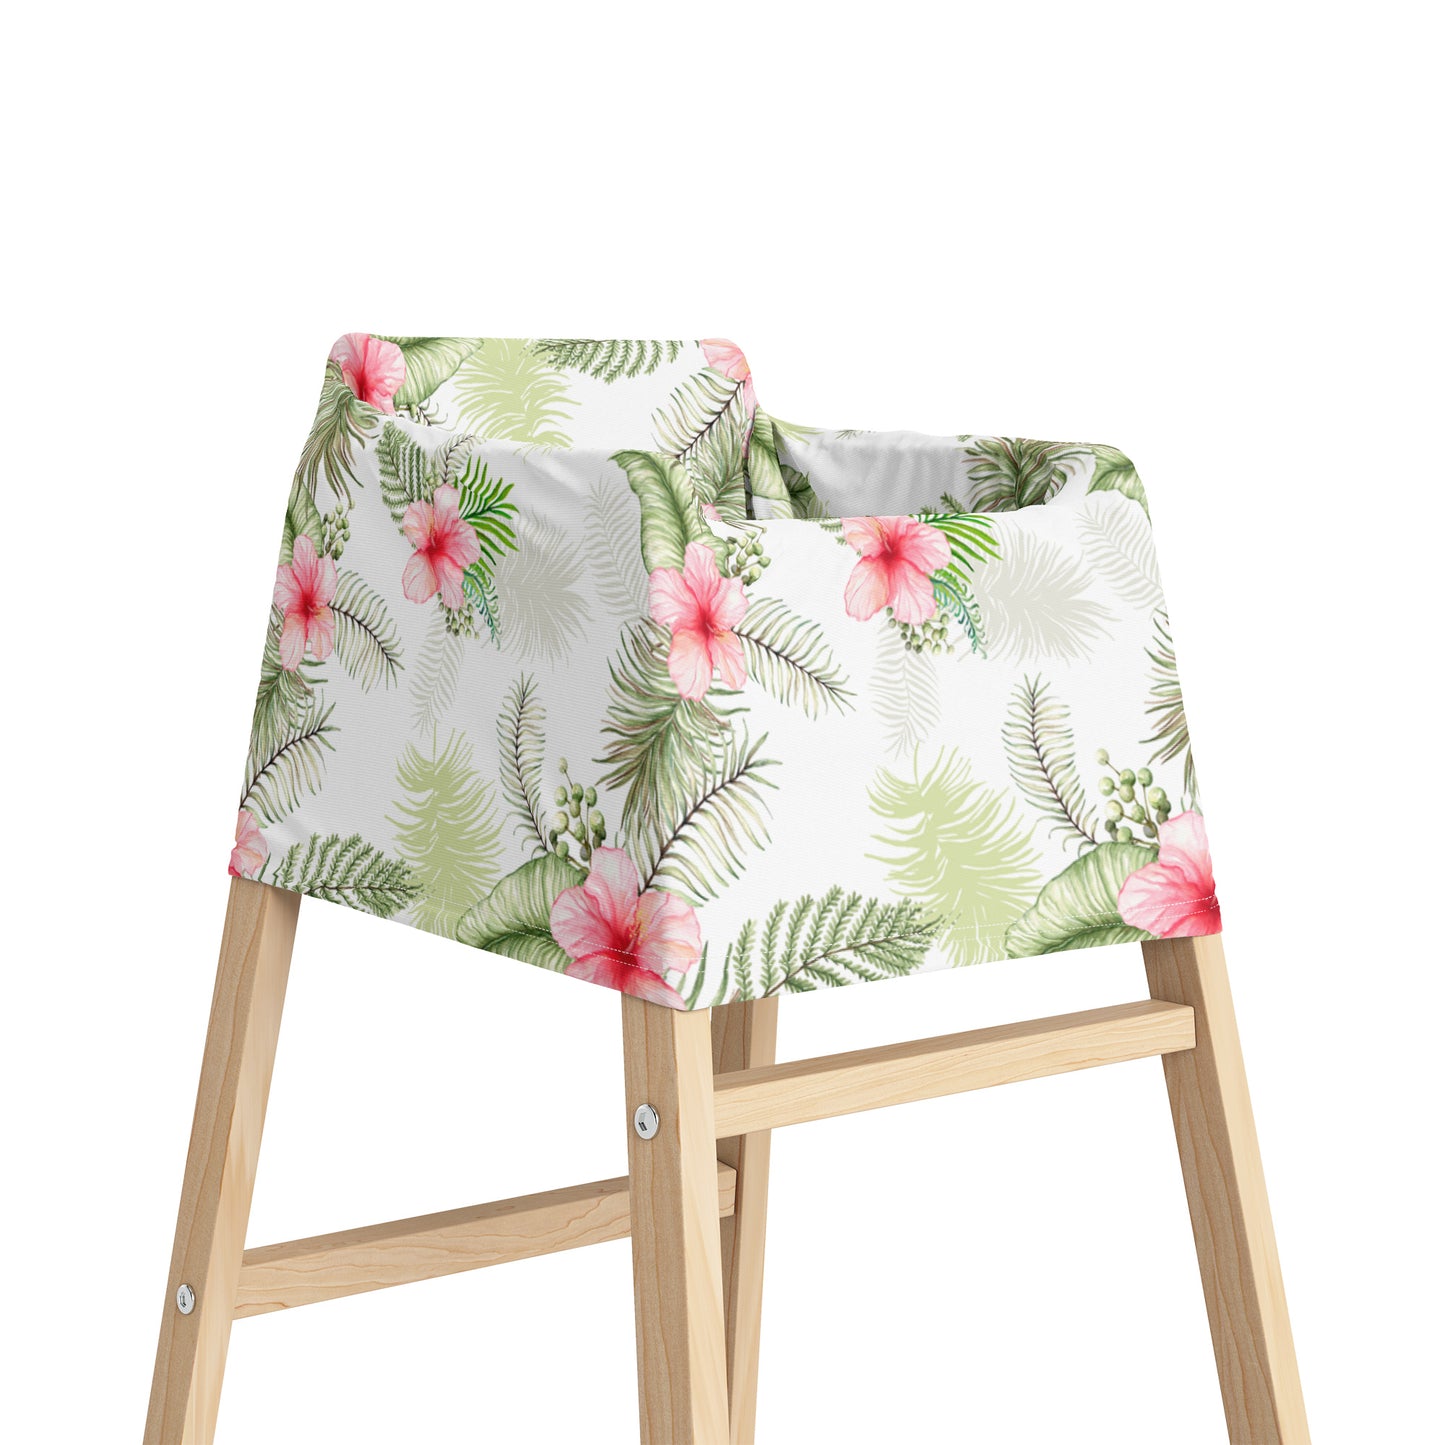 White Tropical Leaves Car Seat Cover, Floral Nursing Cover